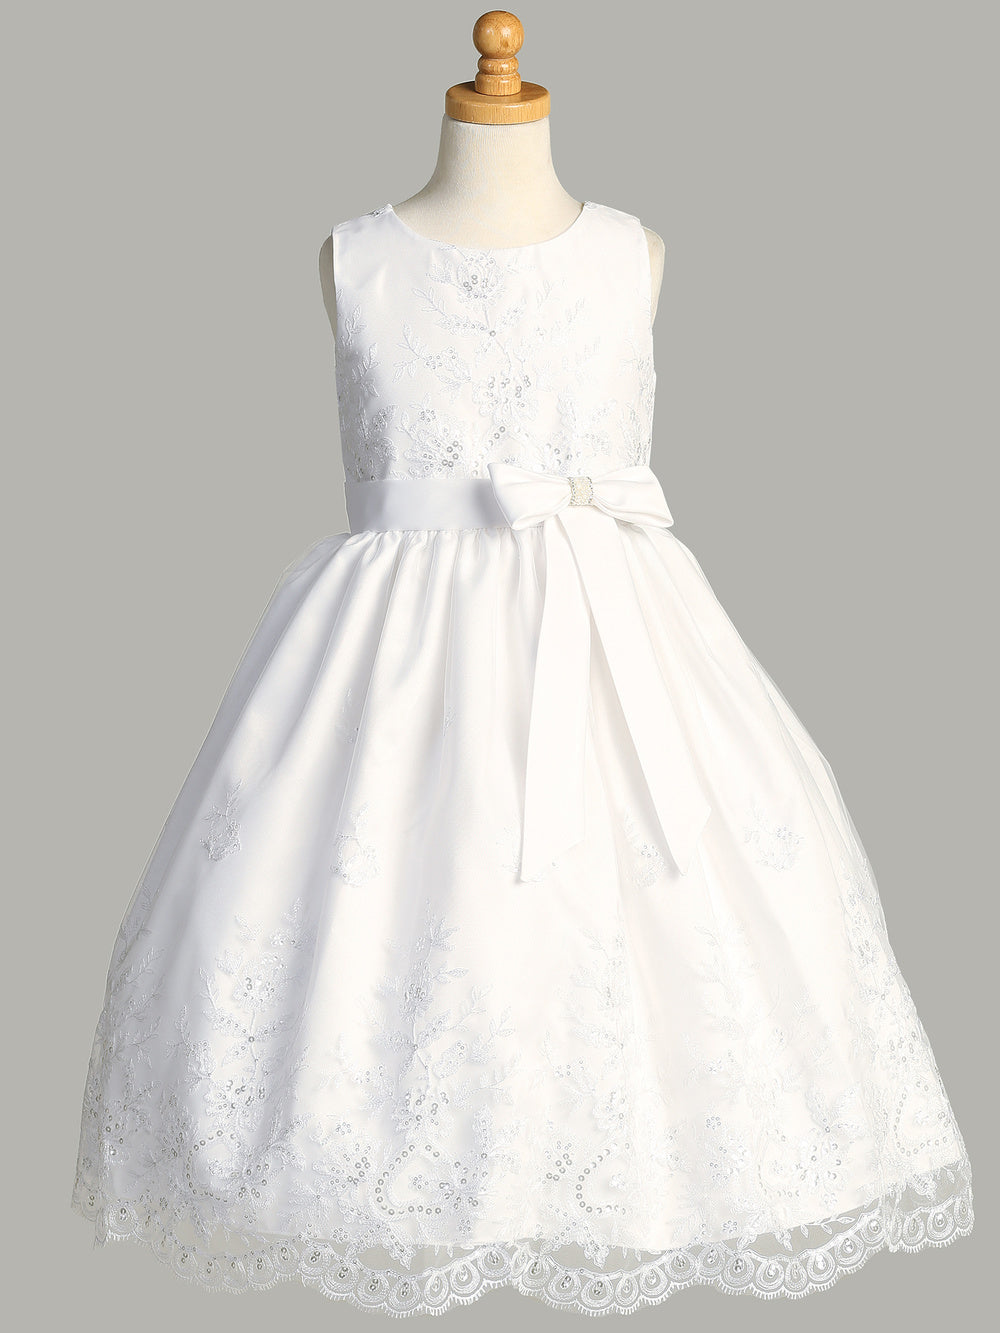 Back view of the First Communion Dress showing the zip fastening and satin tie.